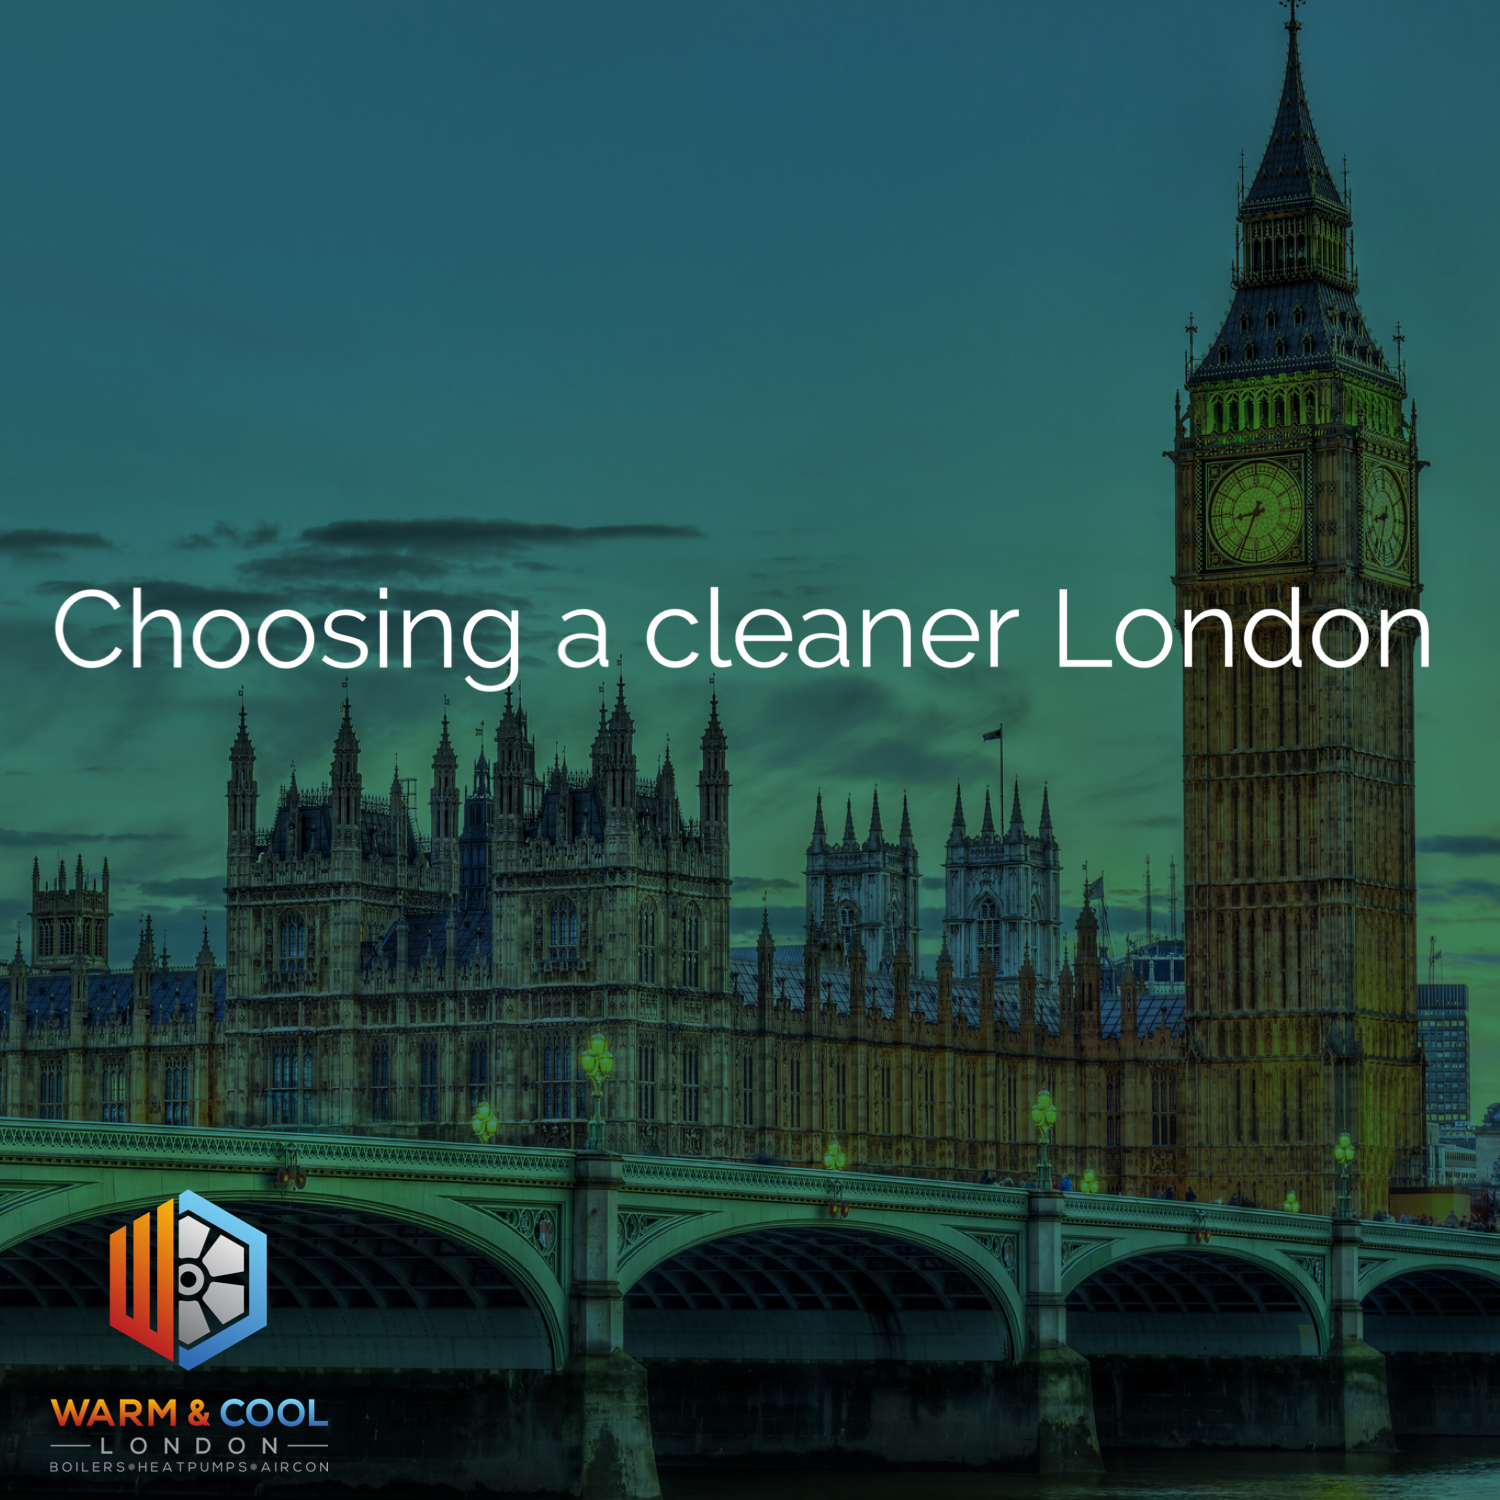 WCL - Choosing a cleaner London